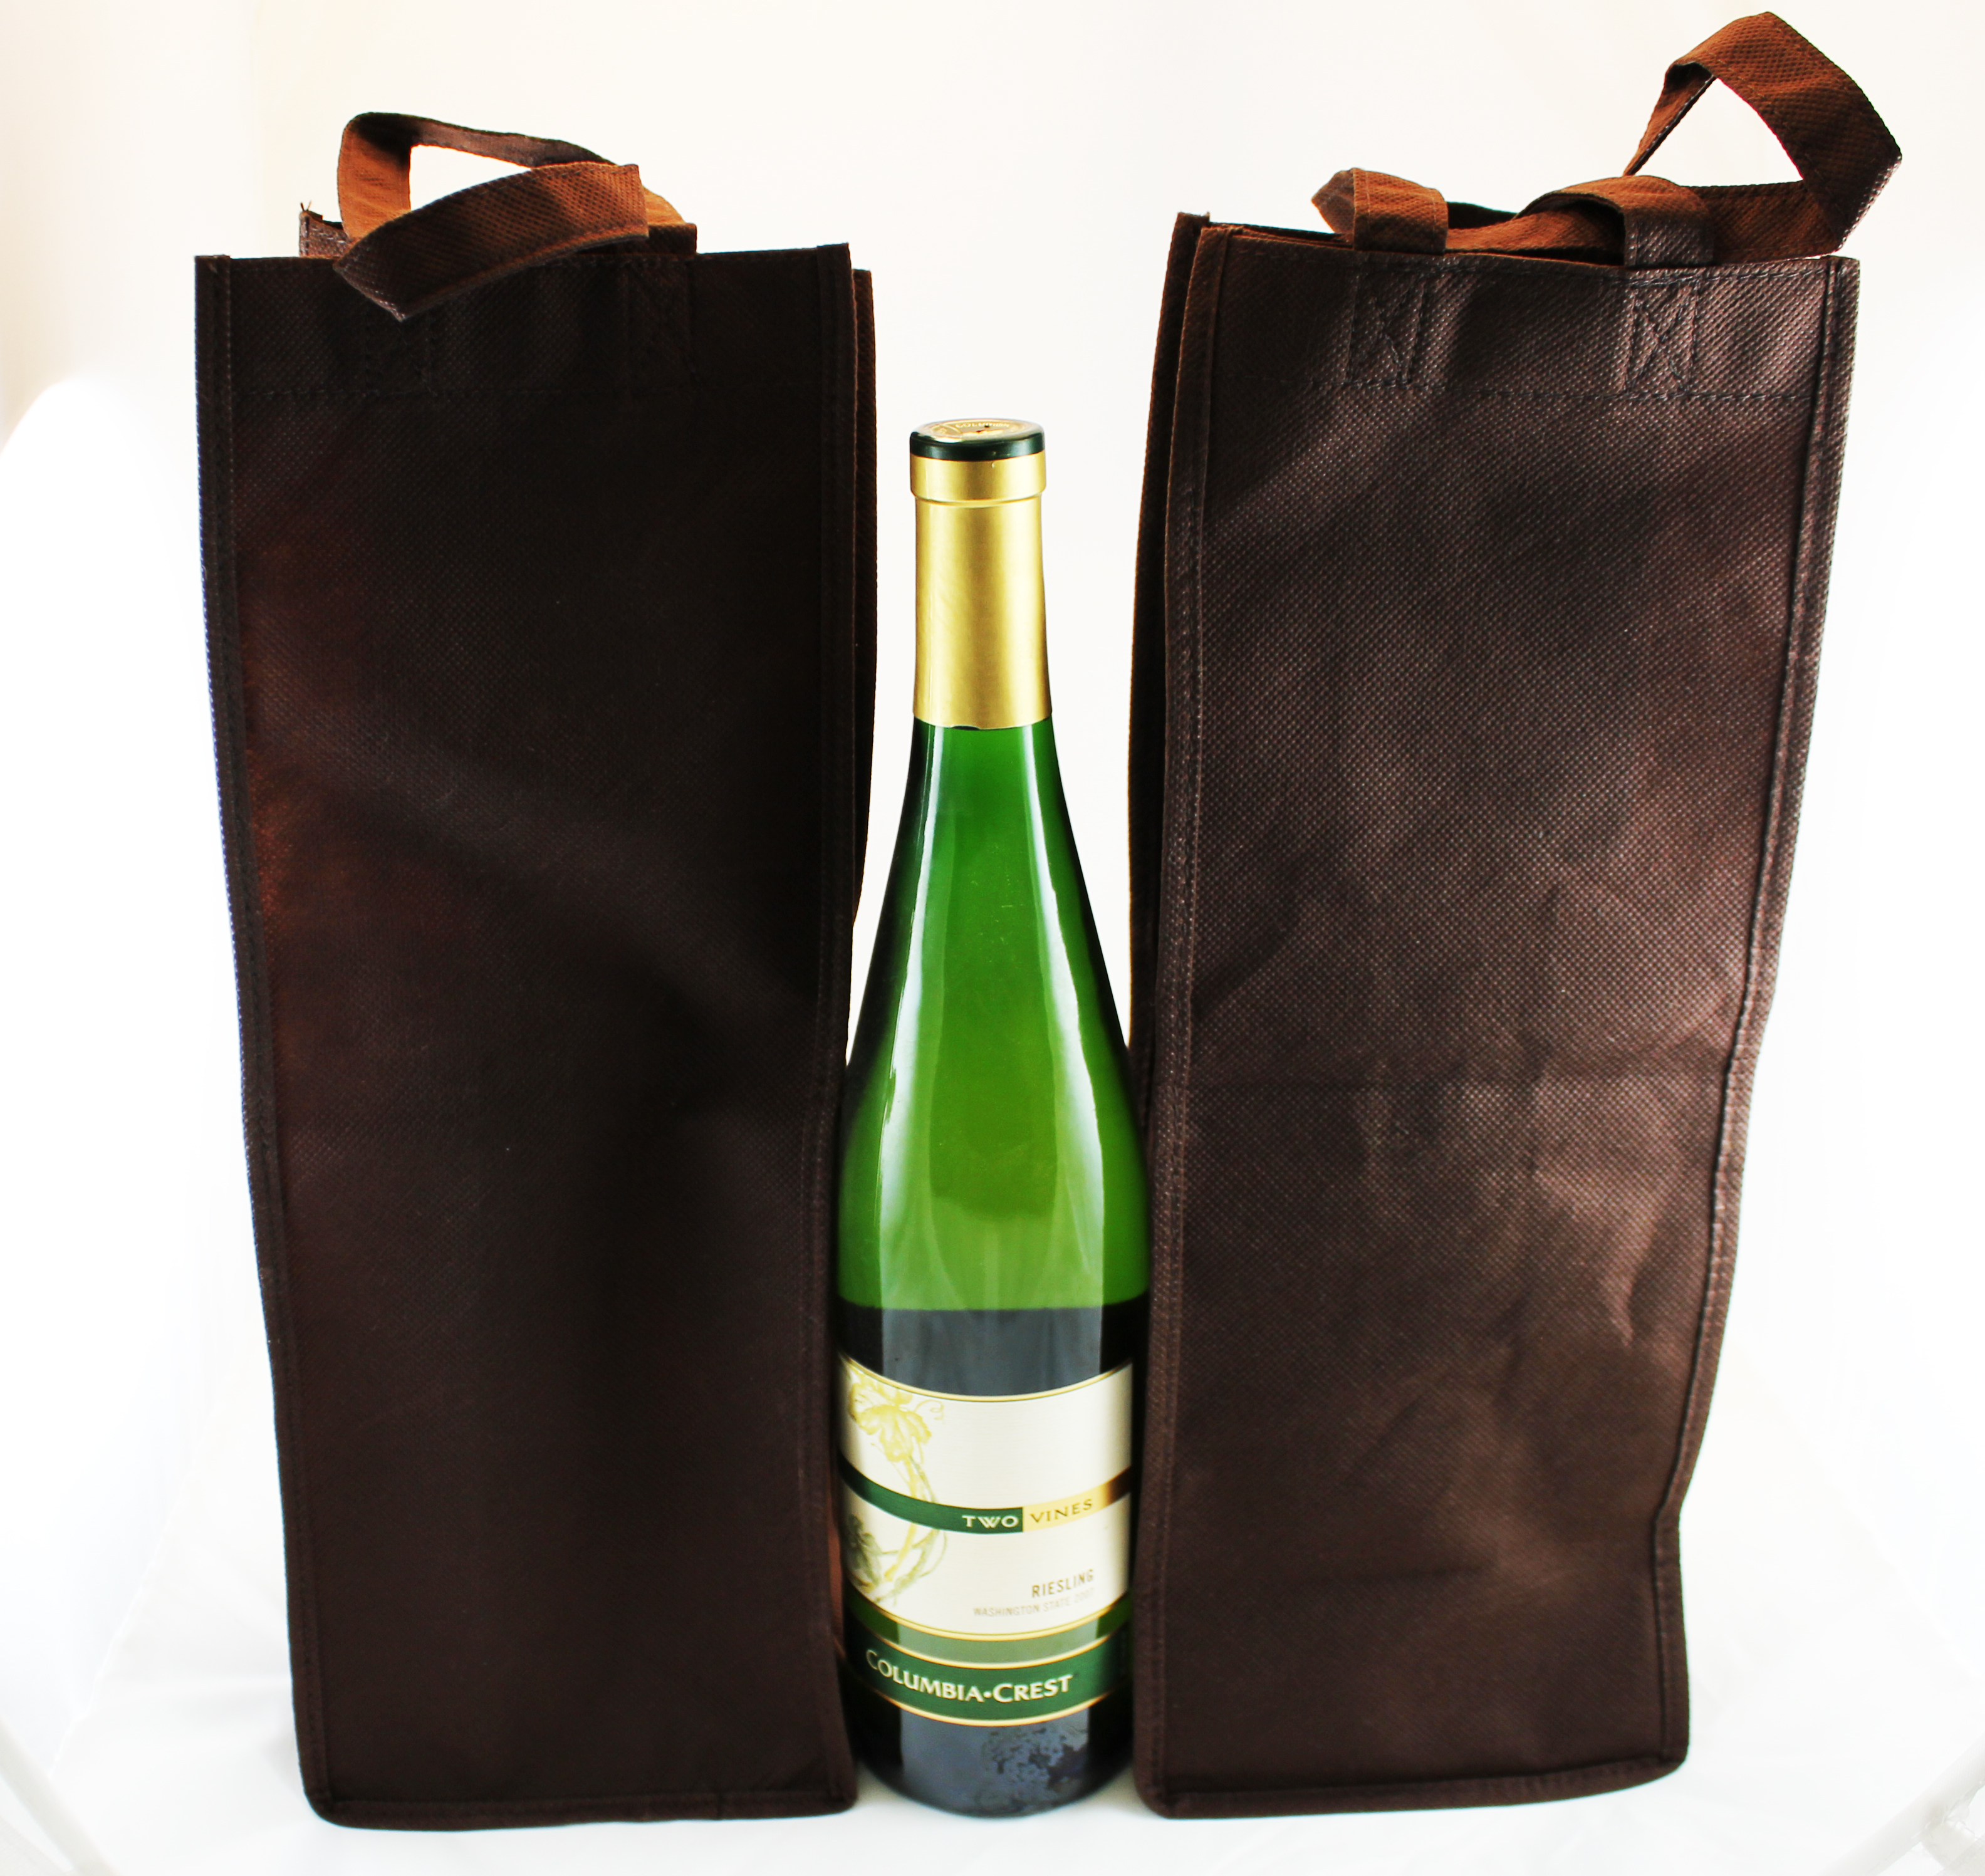 Brown wine totes with handles and pocket for bottle opener